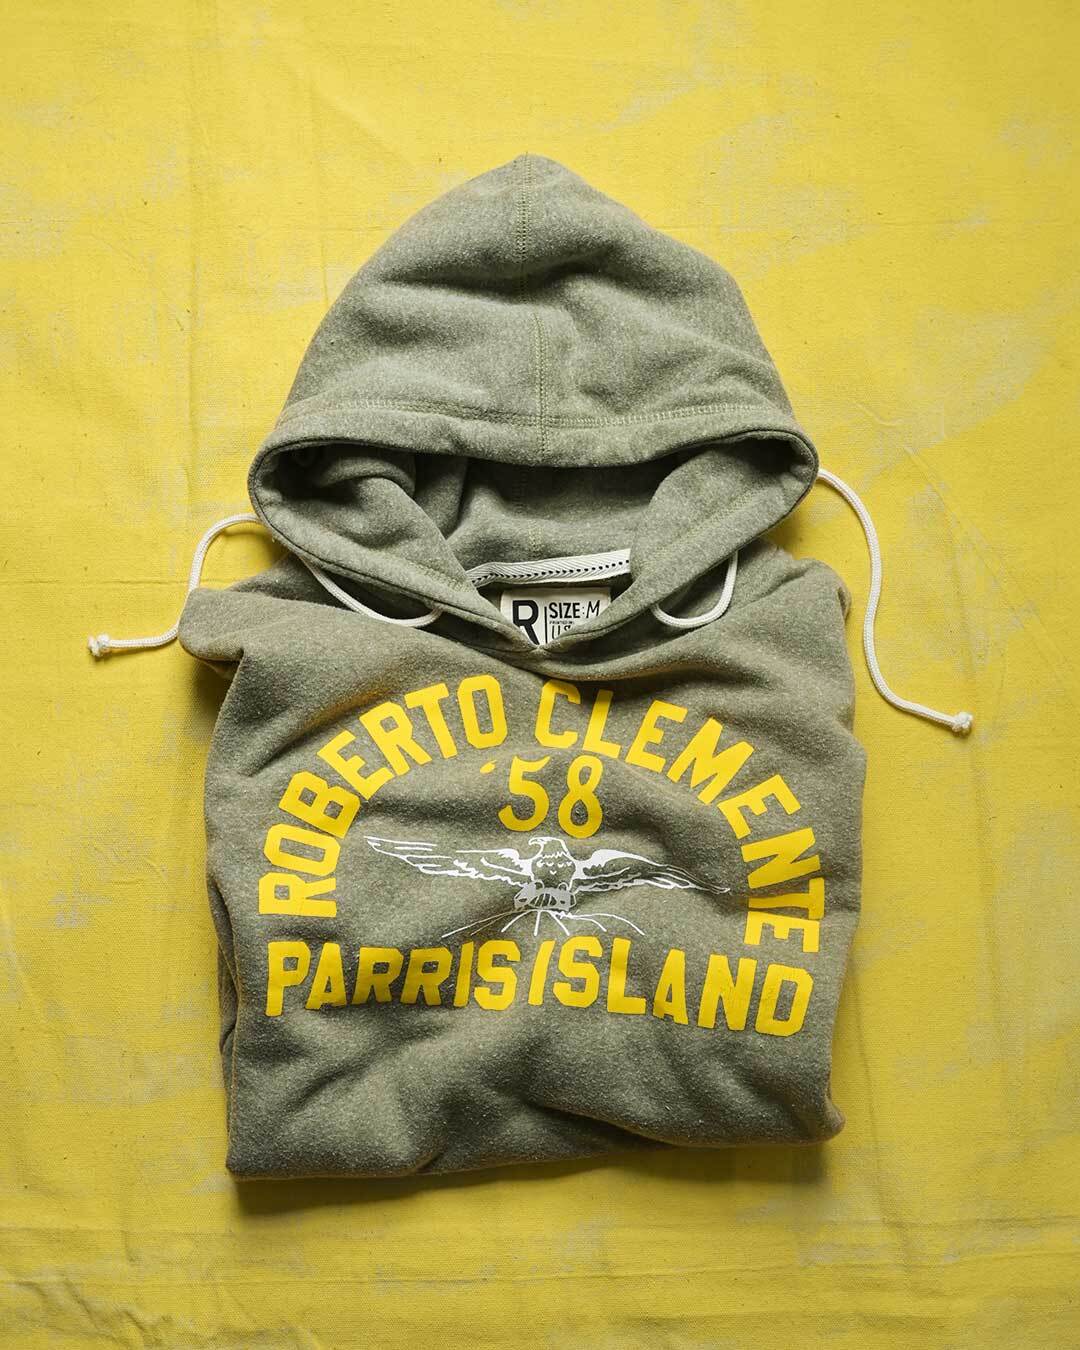 Clemente Parris Island Heather Olive PO Hoody - Roots of Fight